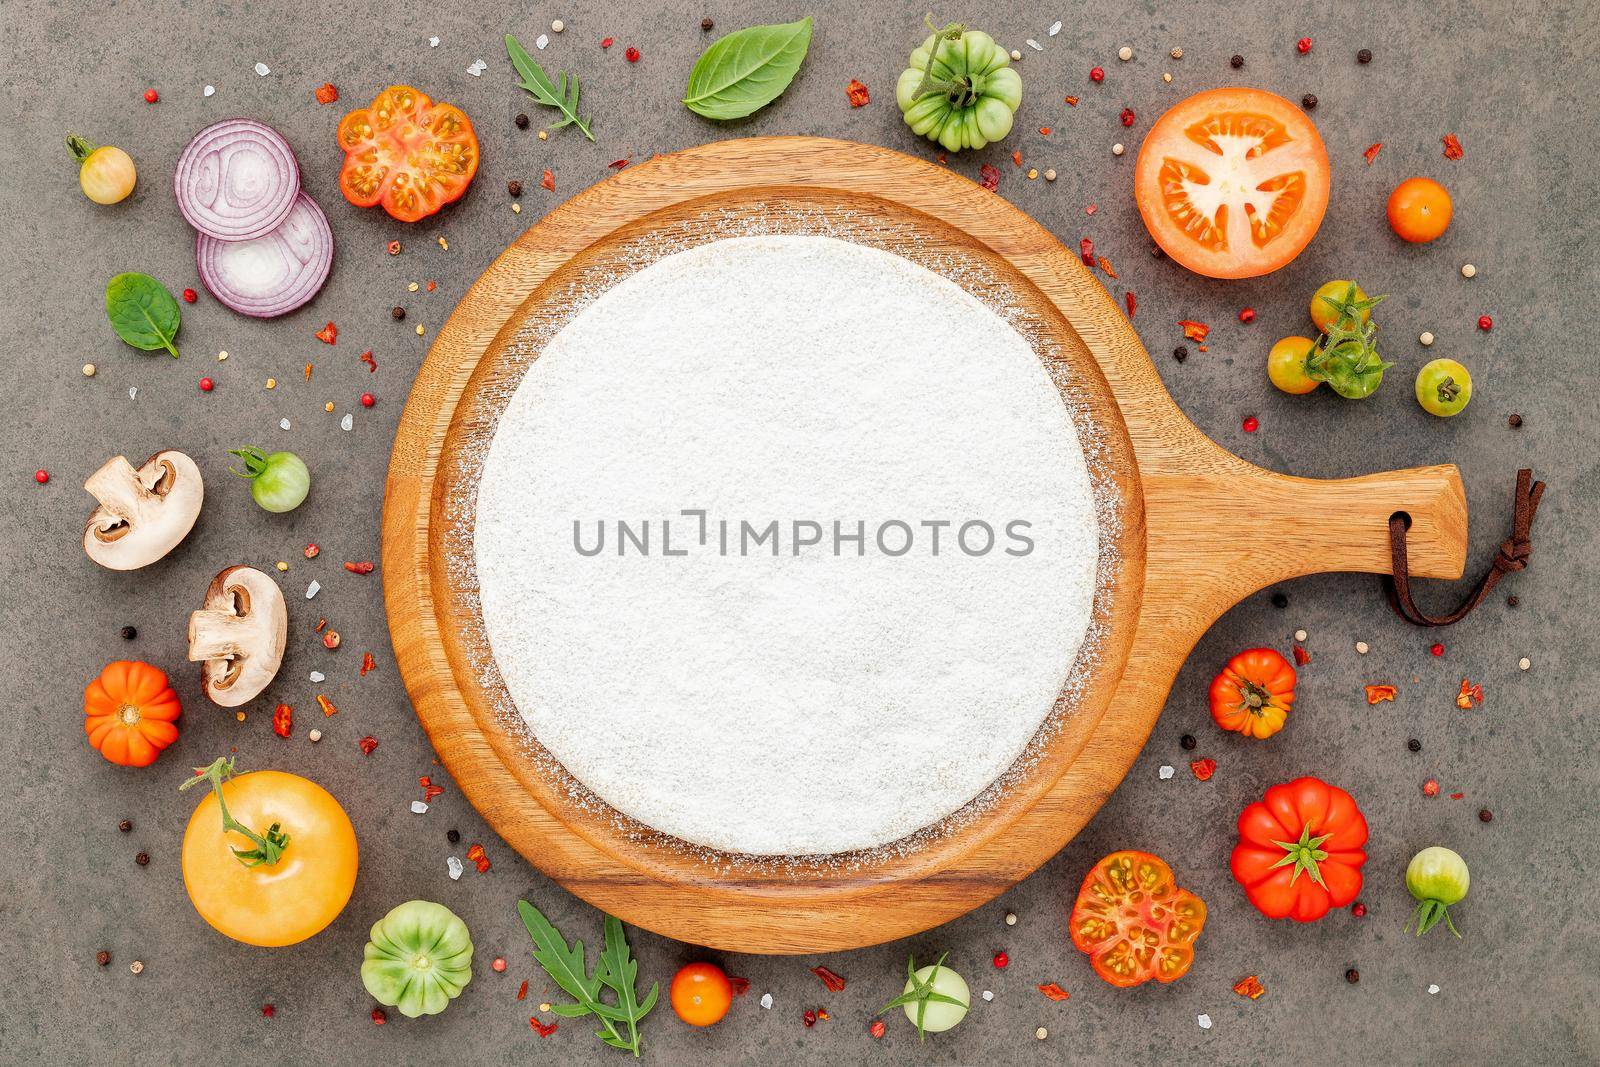 The ingredients for homemade pizza set up on dark stone background. by kerdkanno